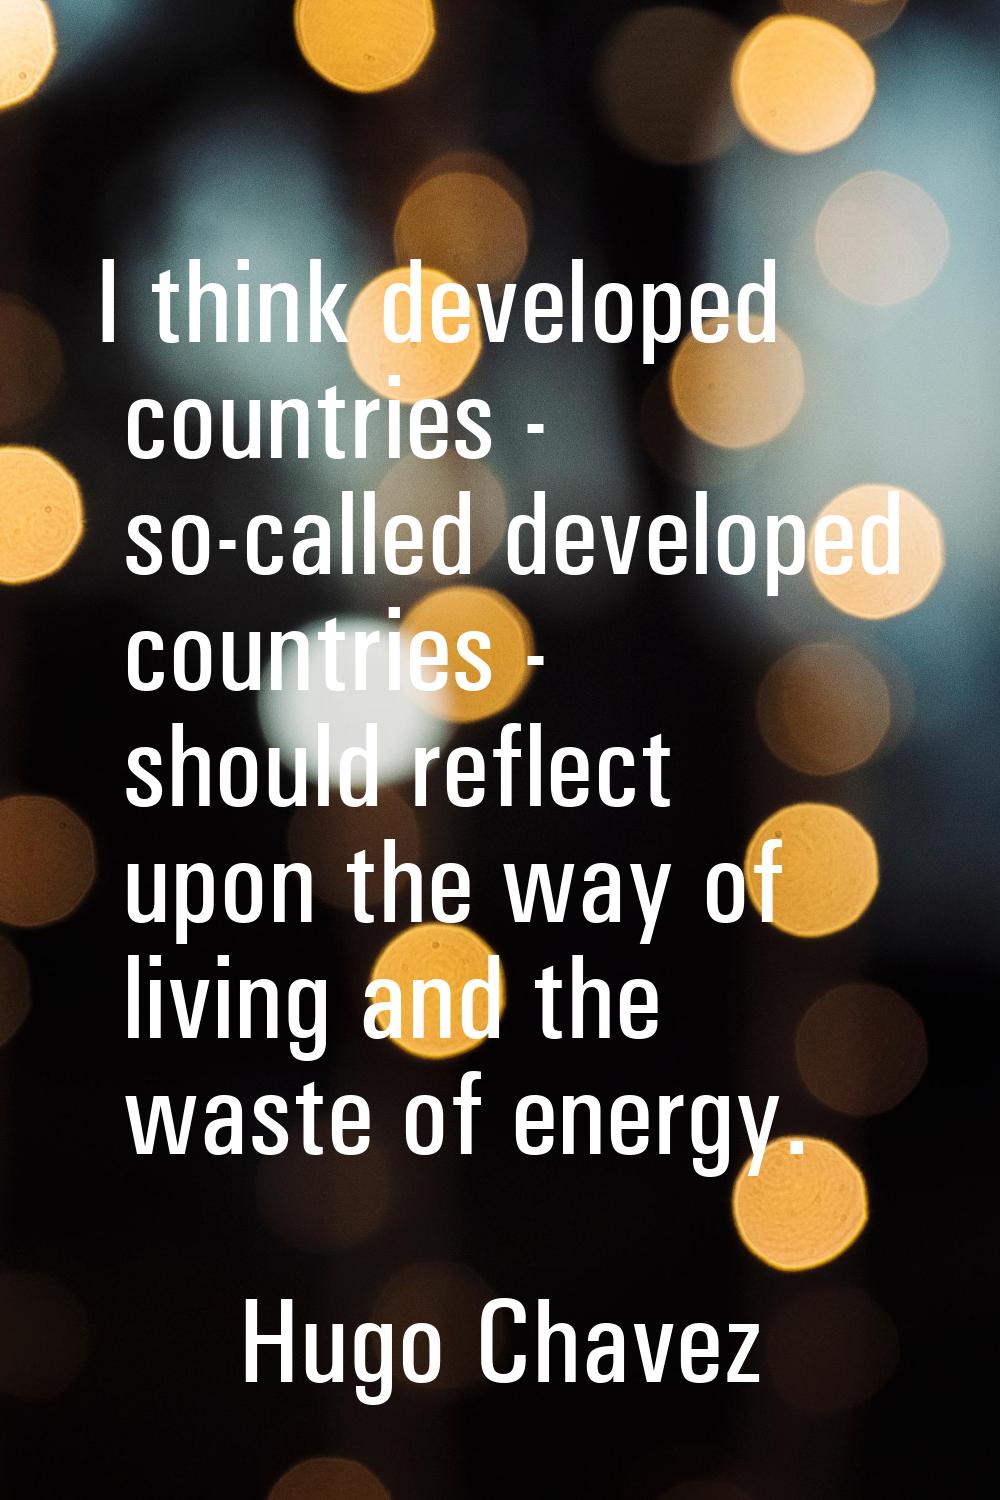 I think developed countries - so-called developed countries - should reflect upon the way of living